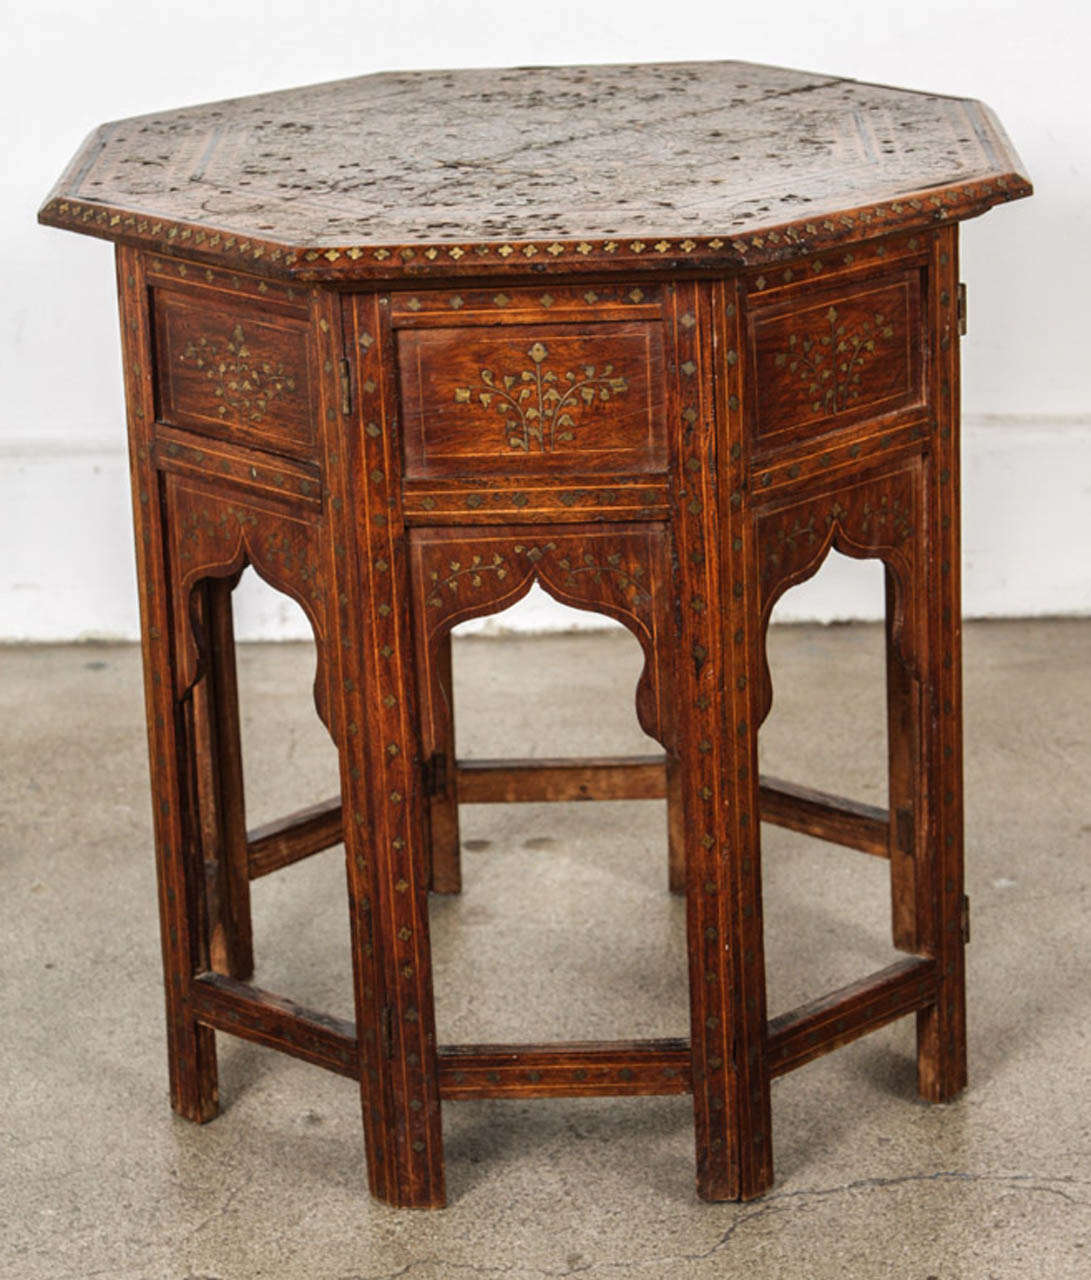 Late 19th century Anglo Indian folding brass inlaid octagonal side table.
Fine and elegant Anglo-Indian octagonal rosewood table with elaborate brass and ebony inlay.The octagonal surface is finely carved and inlaid with brass and ebony designs (